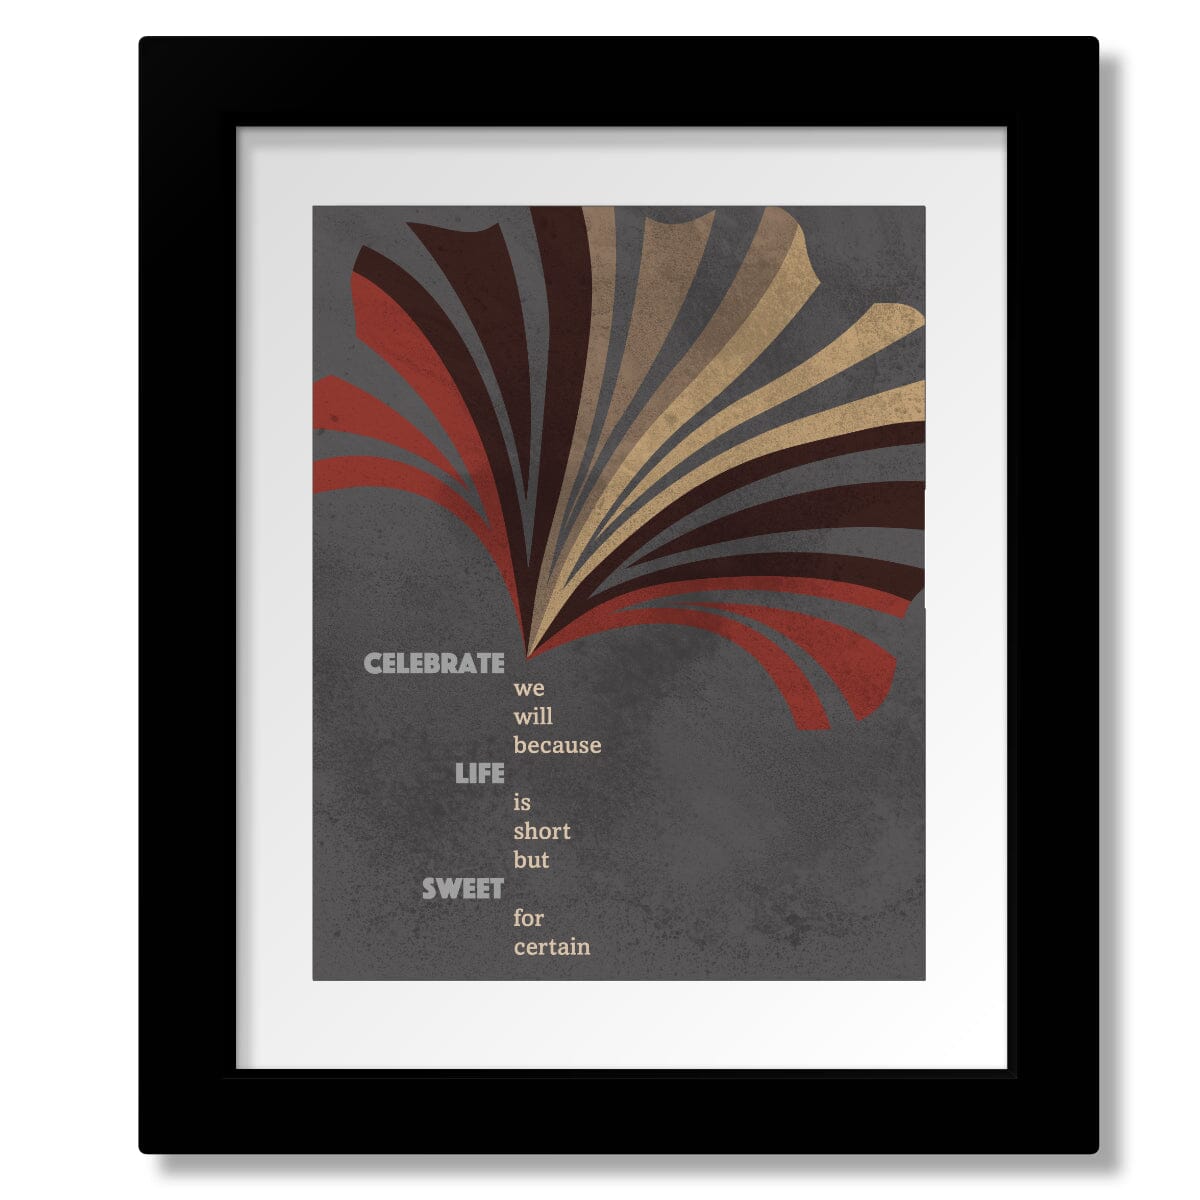 Two Step by Dave Matthews Band - Music Print Wall Art Song Lyrics Art Song Lyrics Art 8x10 Matted and Framed Print 